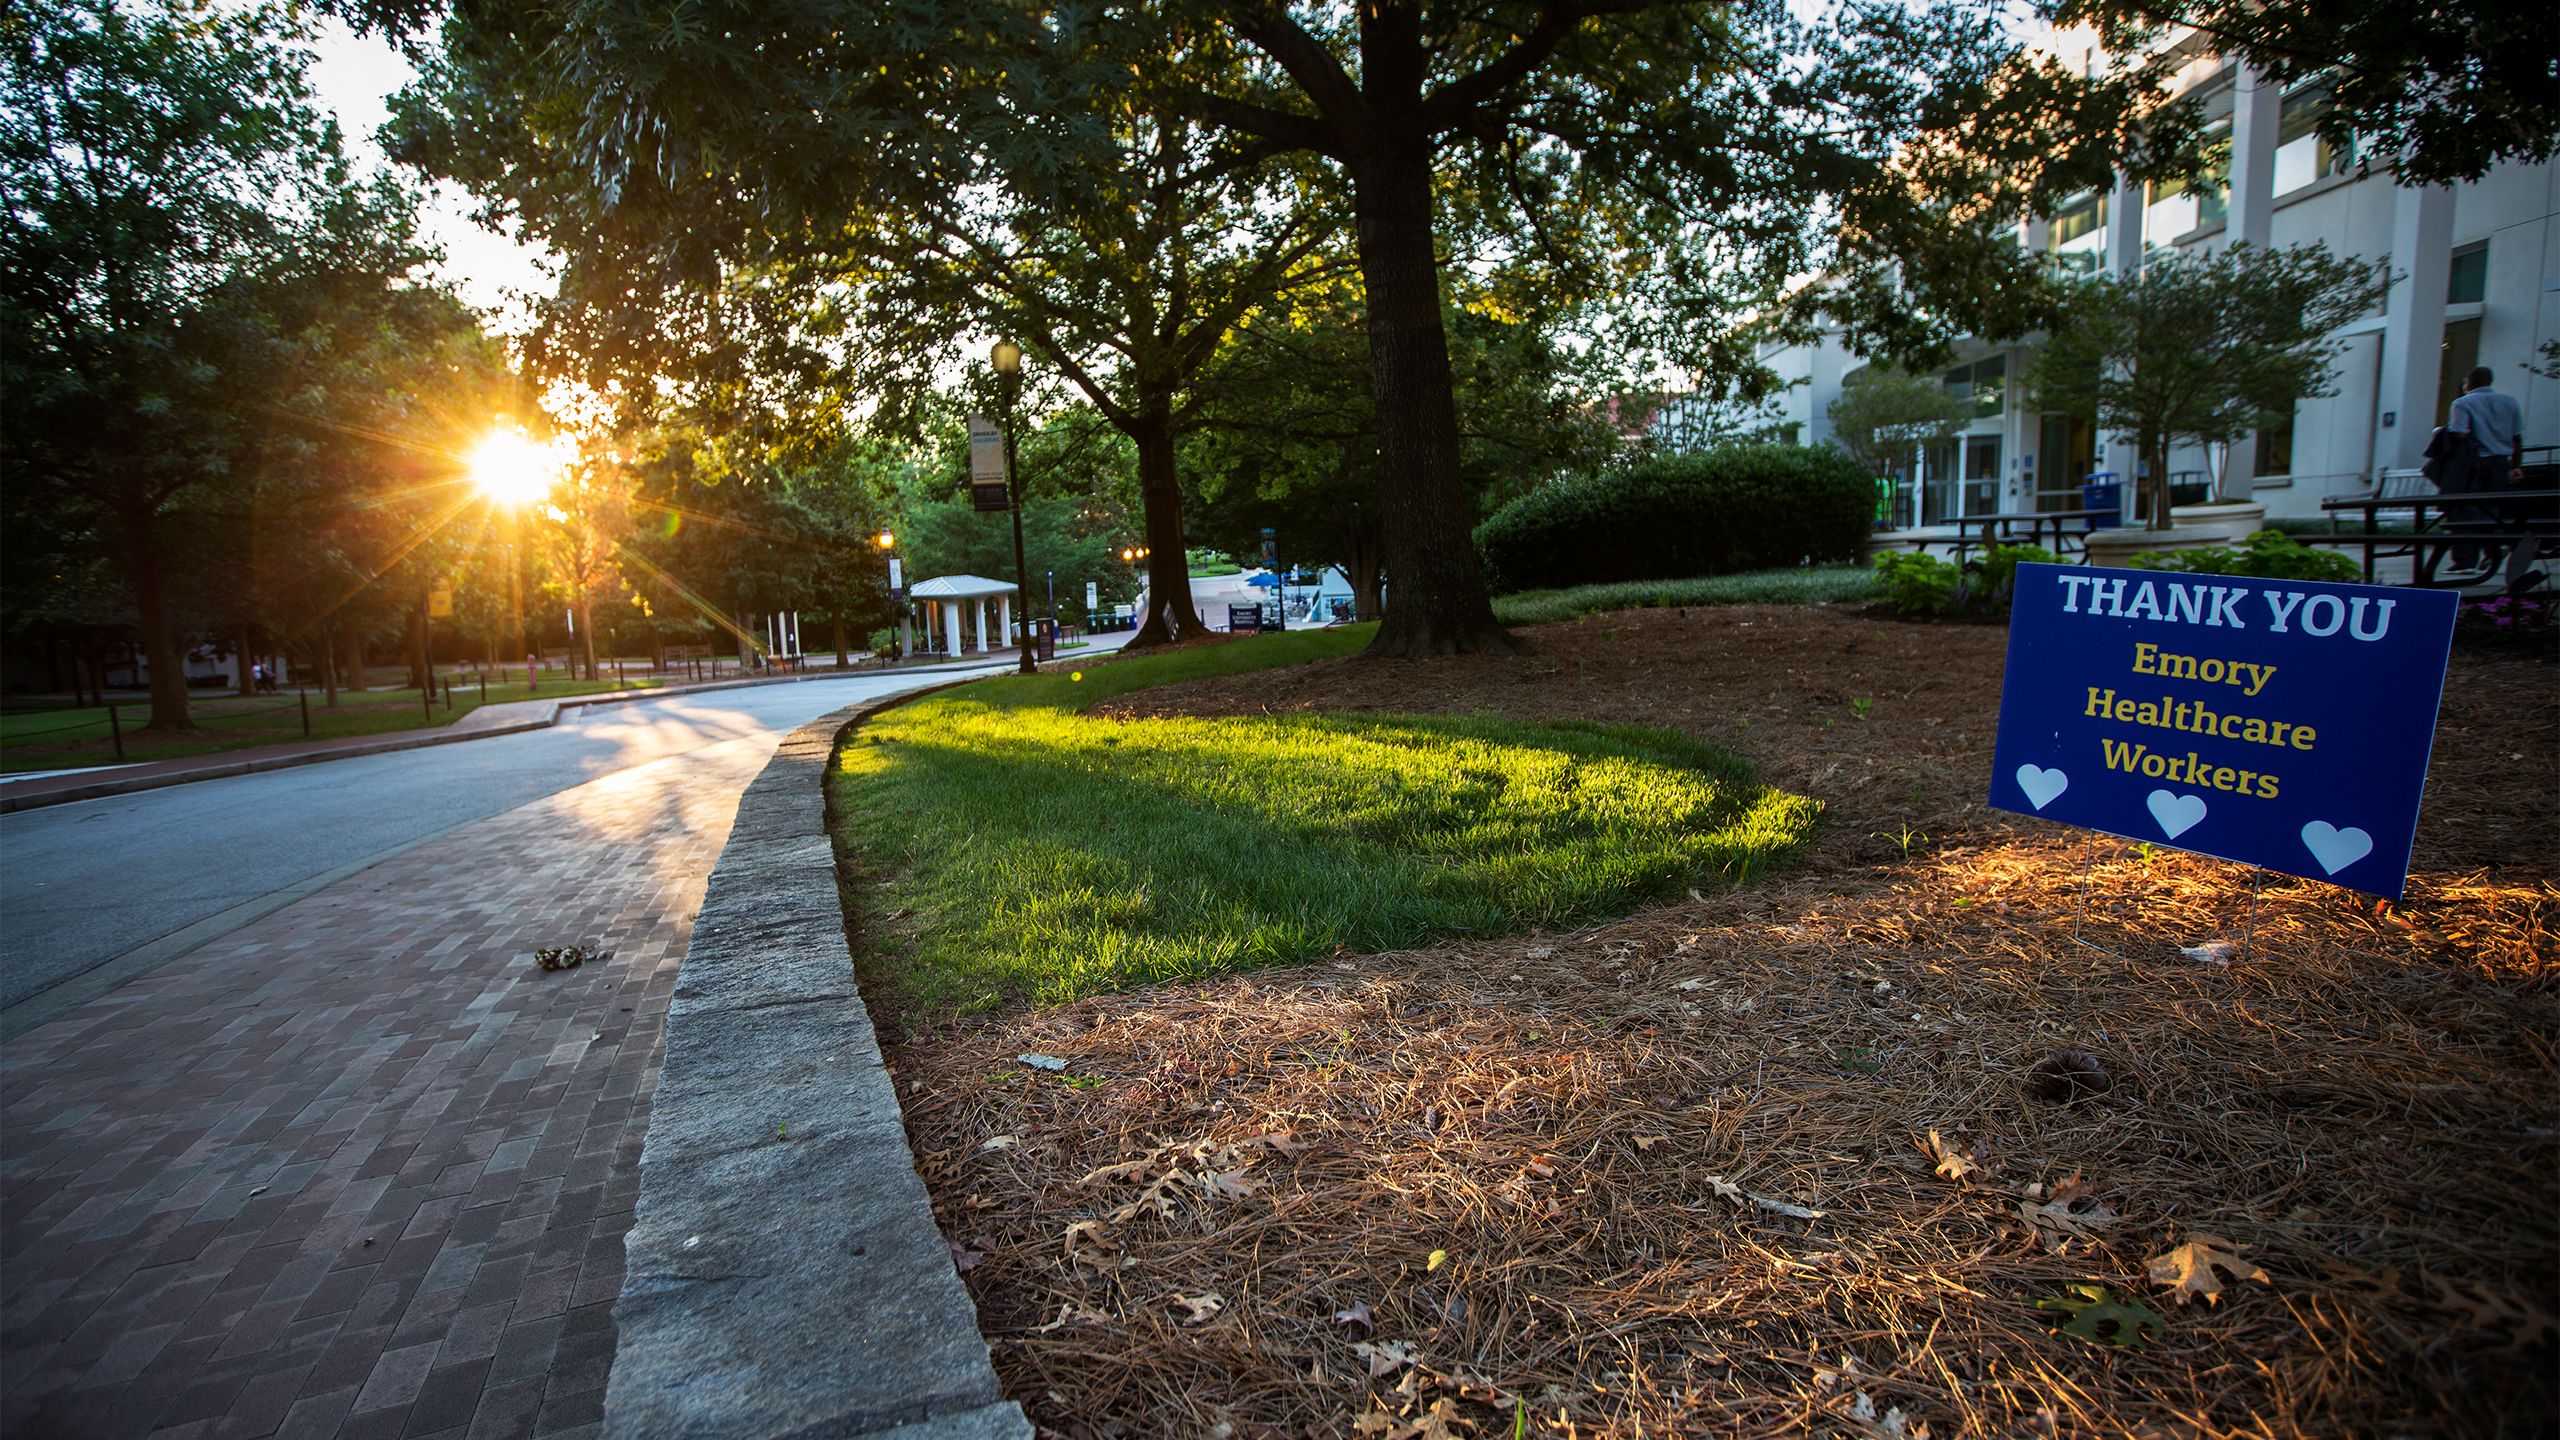 The sun sets on the Emory campus. A sign is visible reading "Thank You Emory Healthcare Workers"